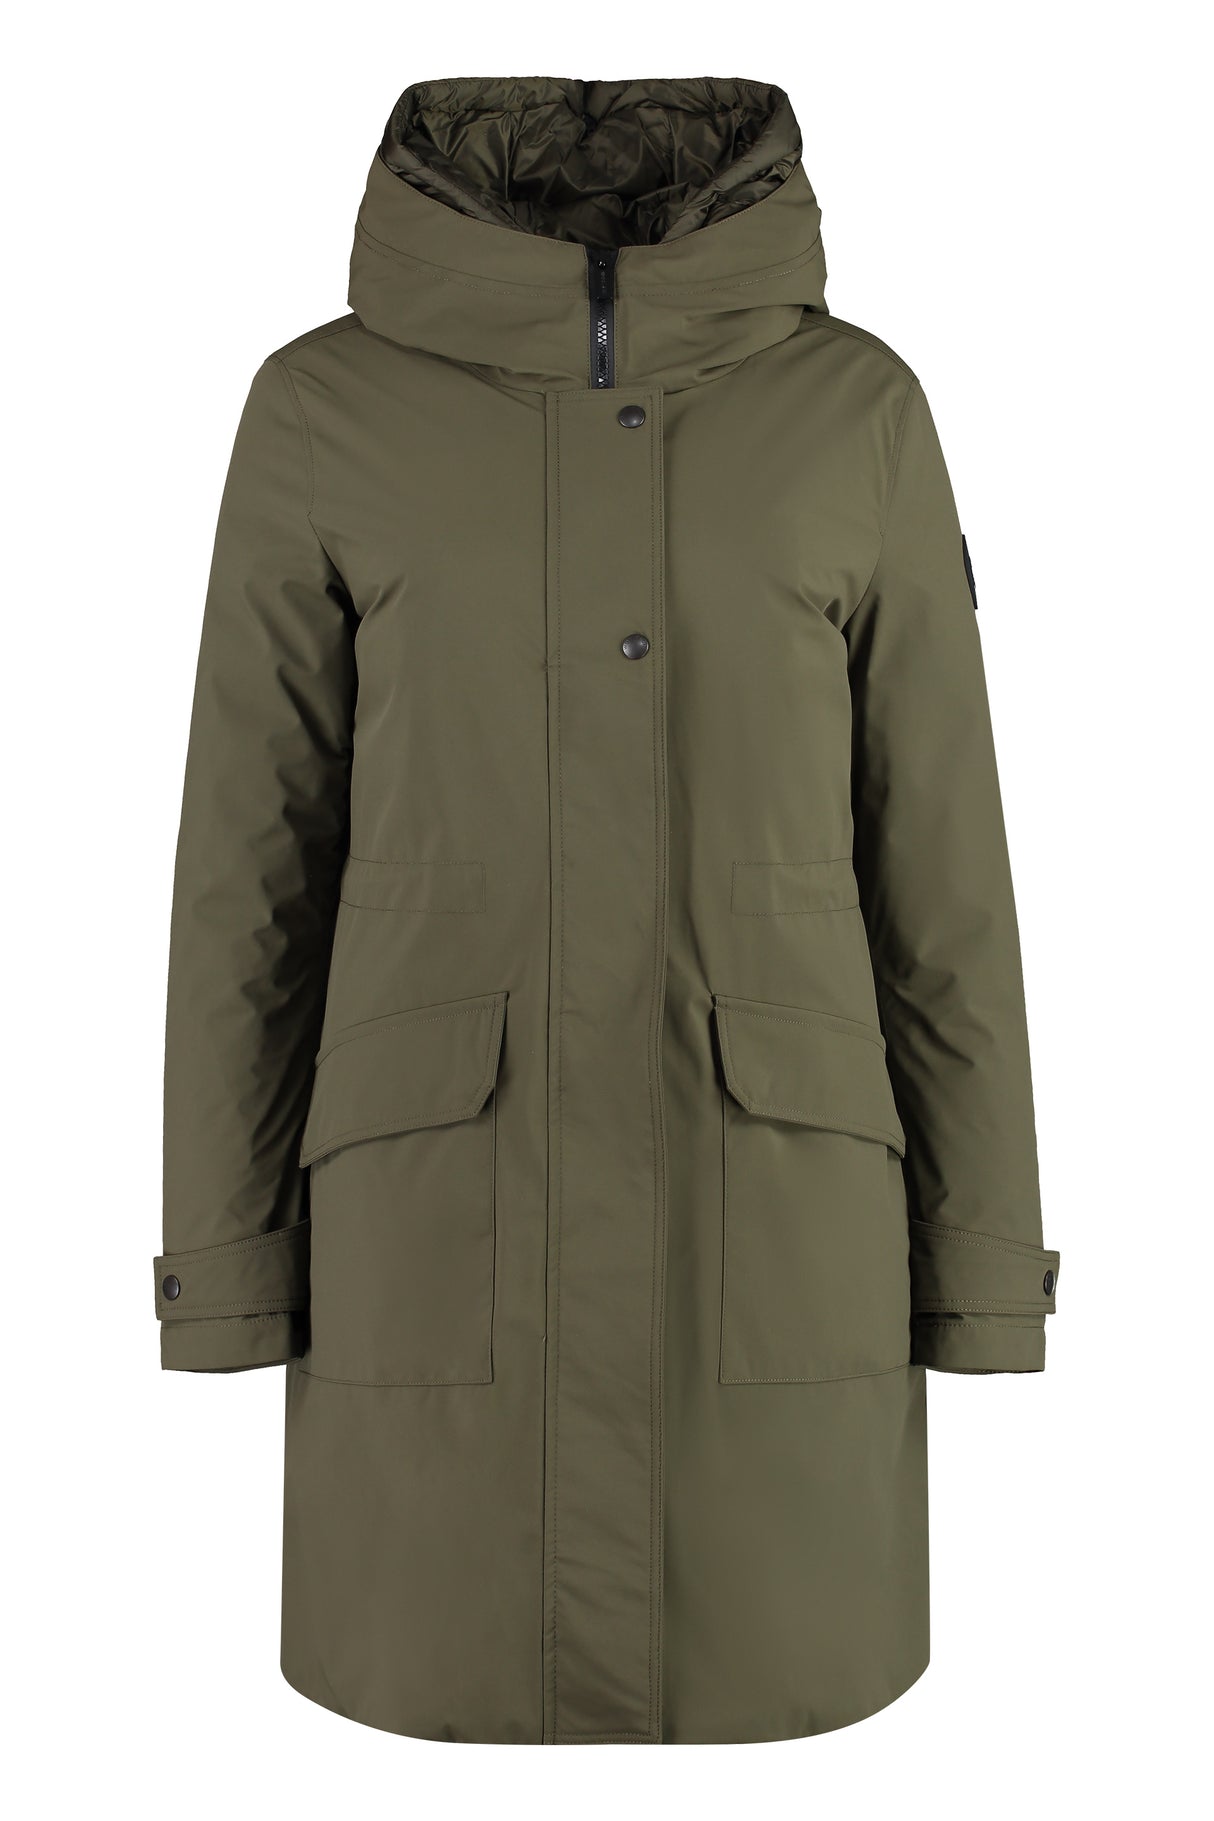 WOOLRICH Green Military Parka Jacket with Removable Down Layer for Women - FW23